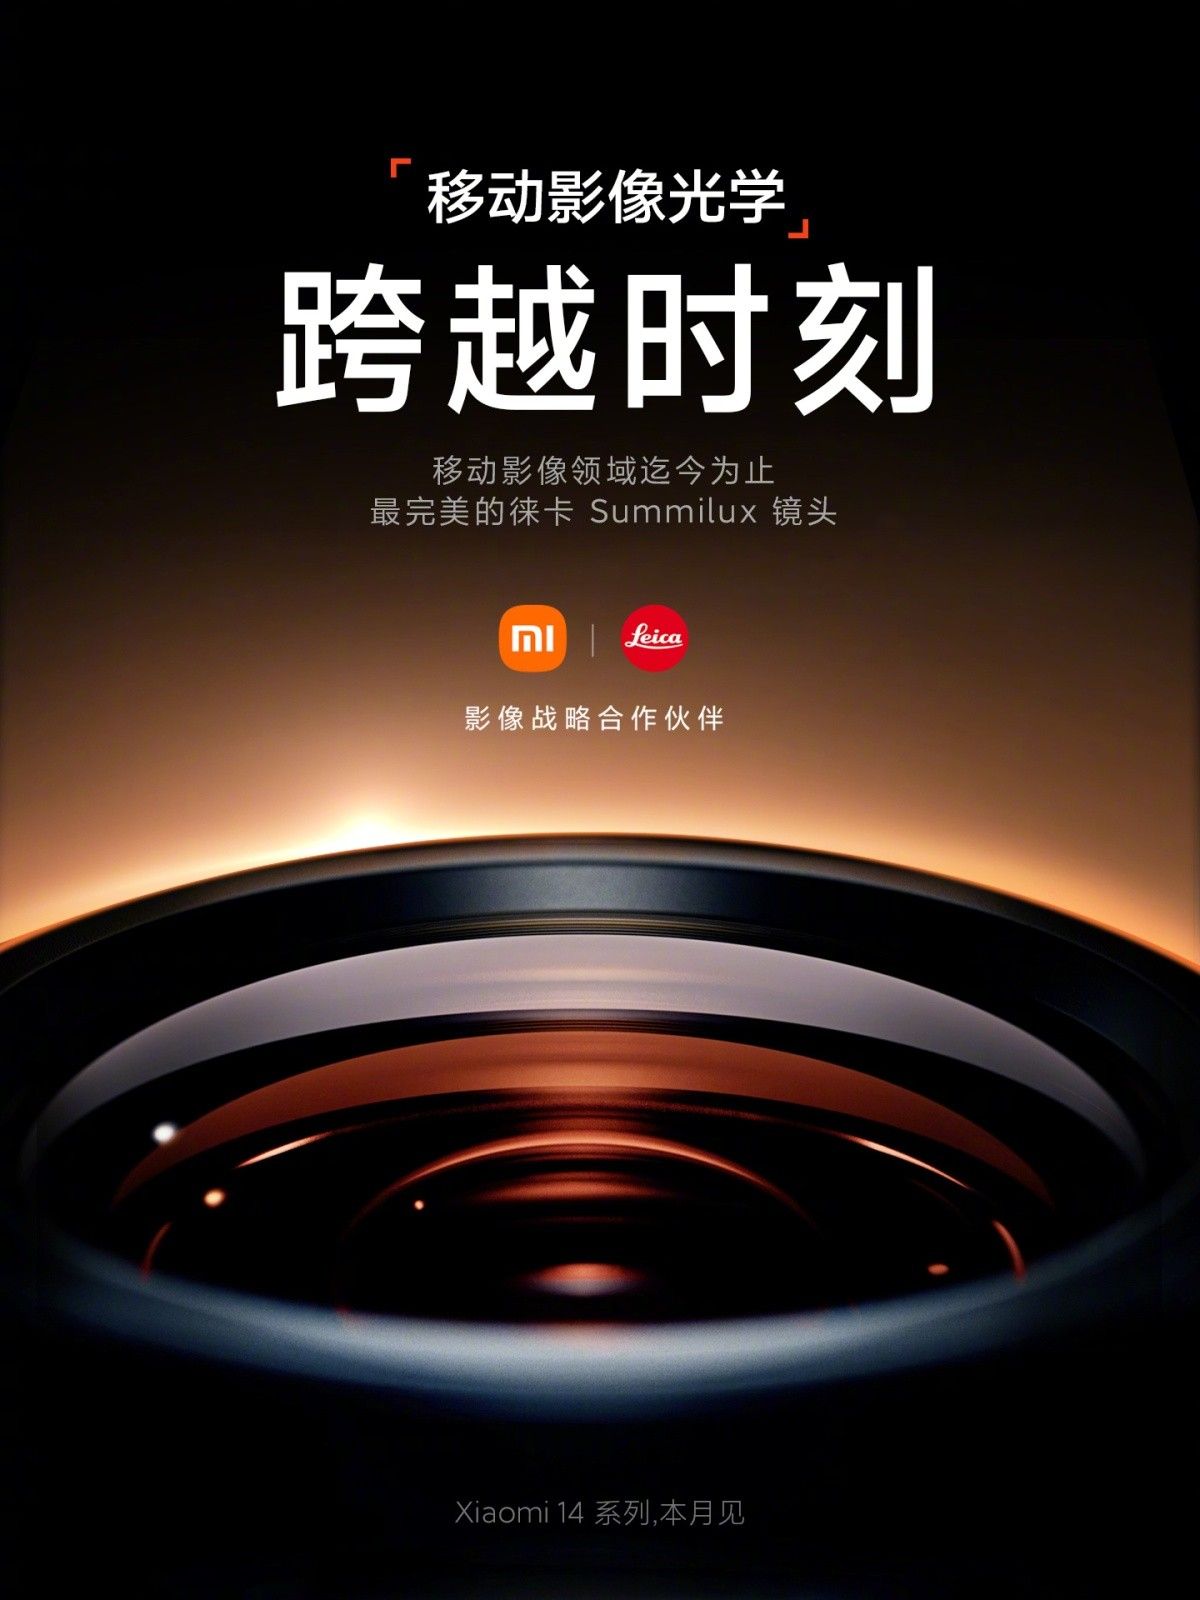 Xiaomi 14 launch confirmed to launch this month